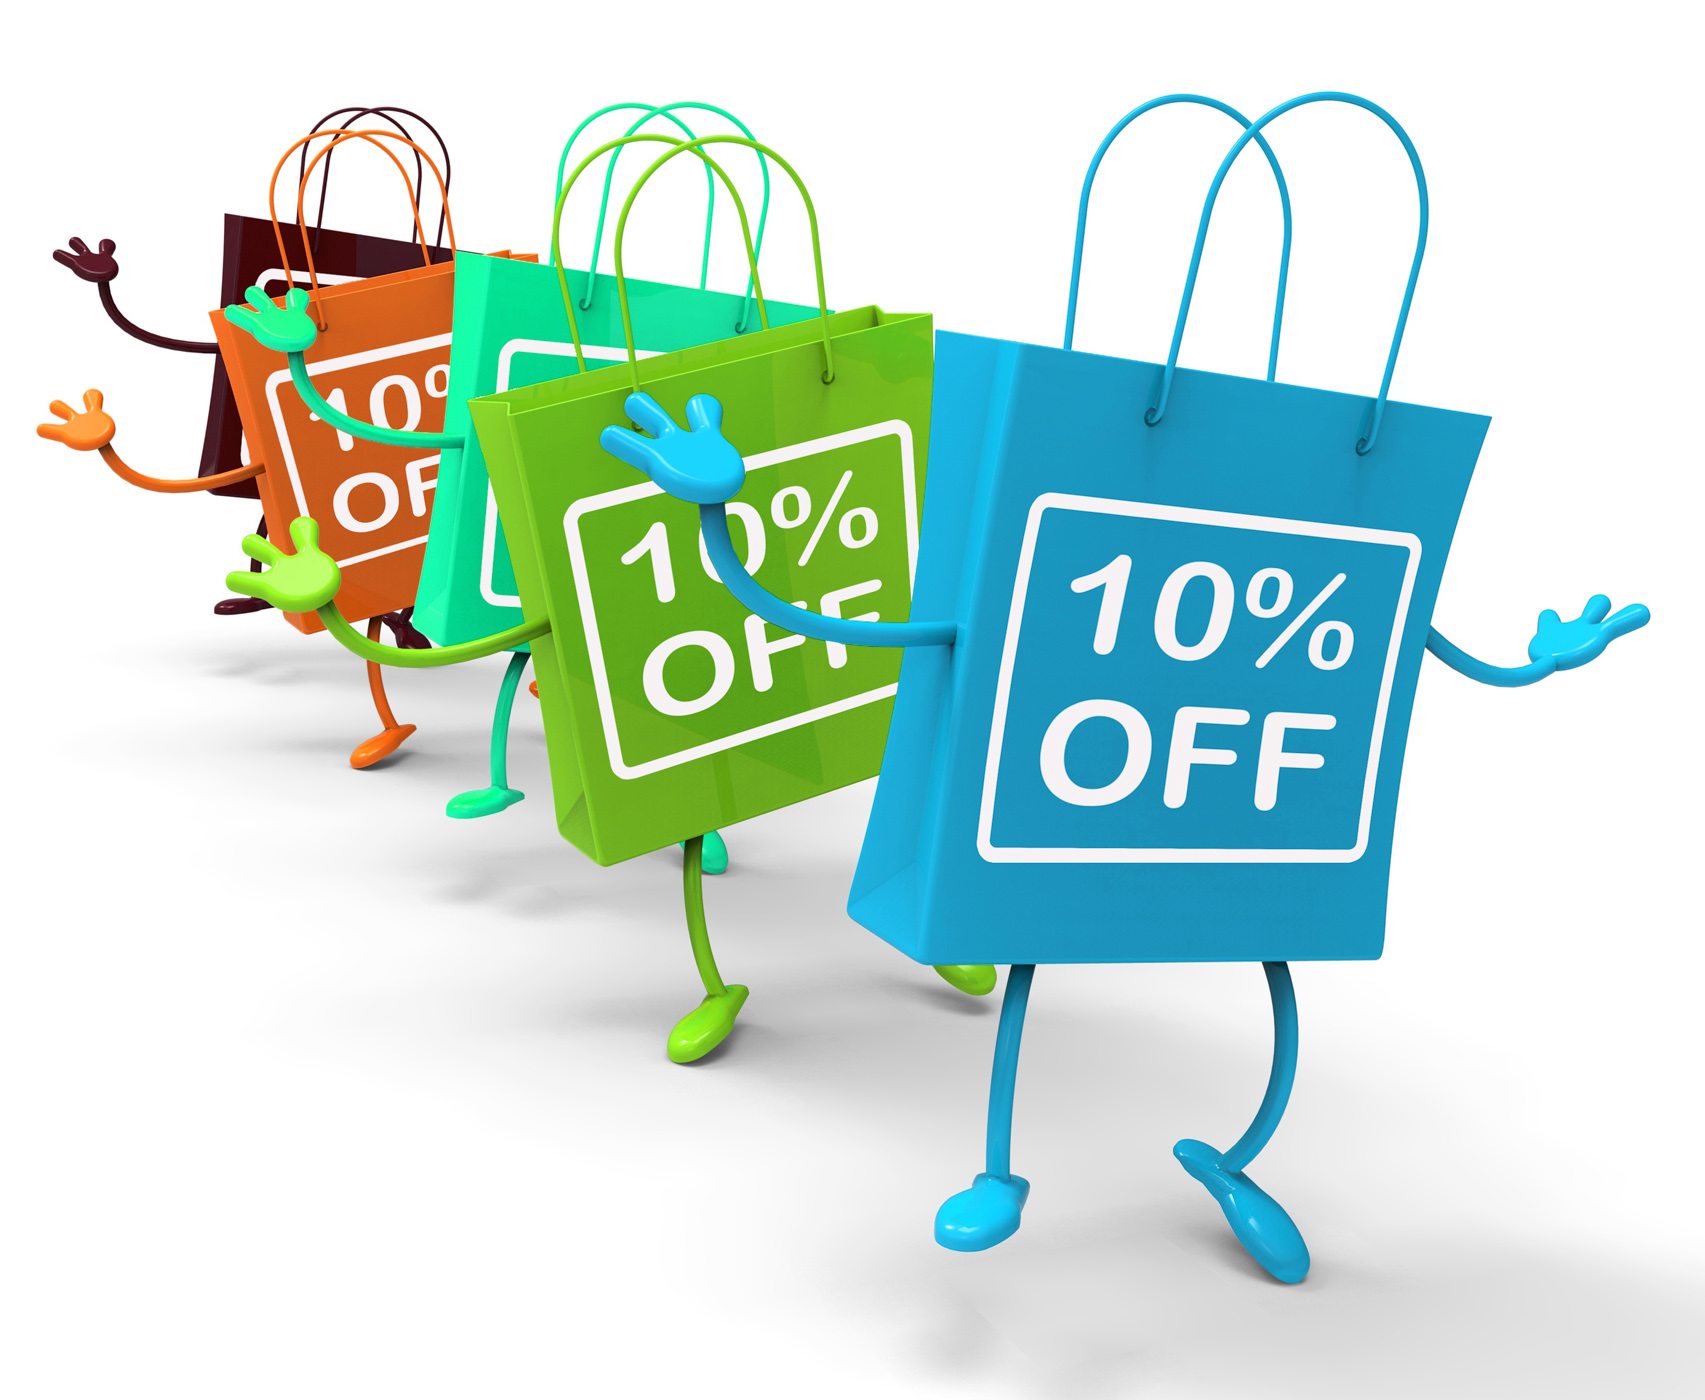 Ten percent off on colored shopping bags show bargains photo